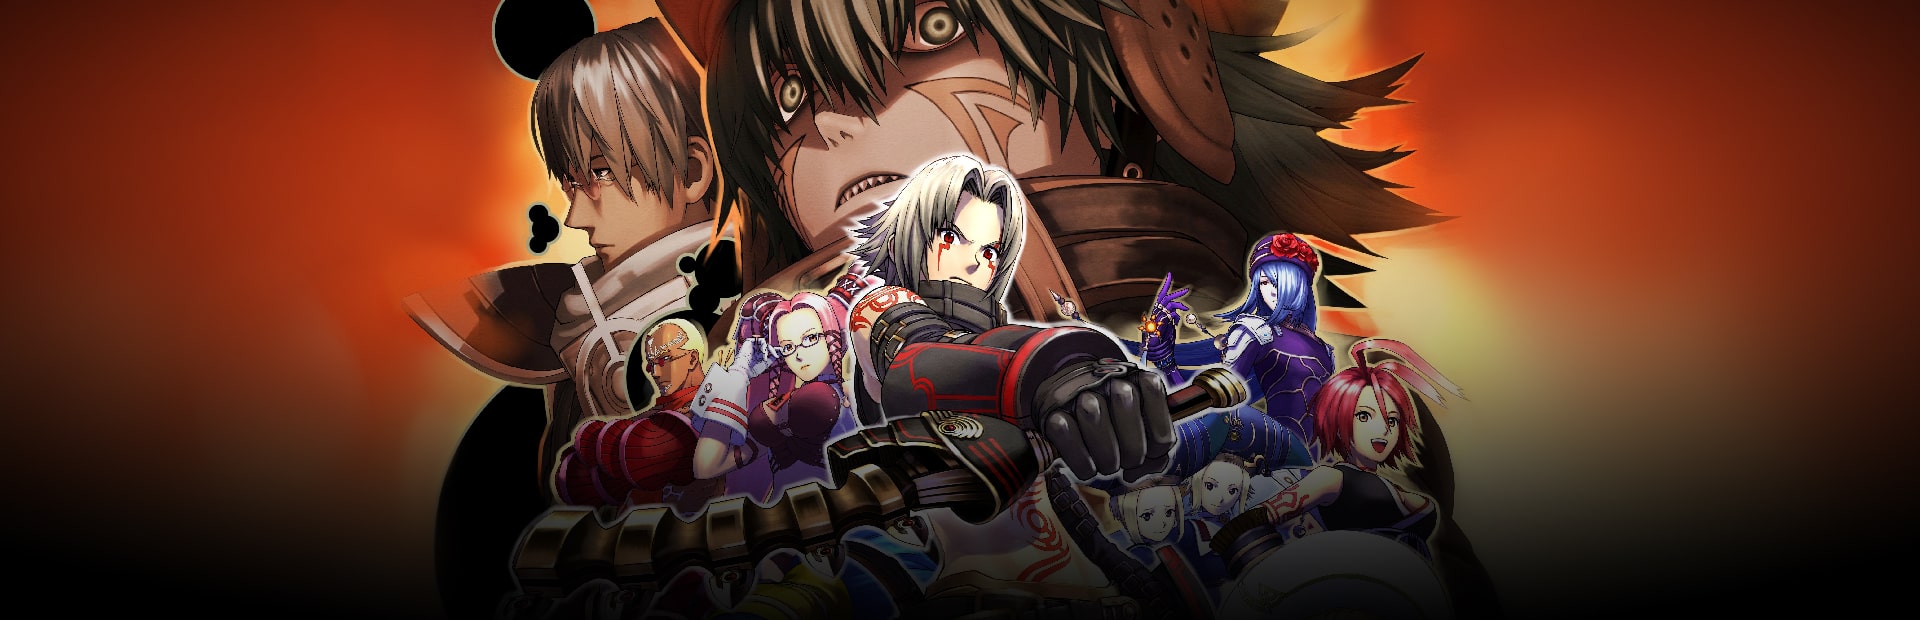 .hack//G.U. Last Recode for PC - Related Items